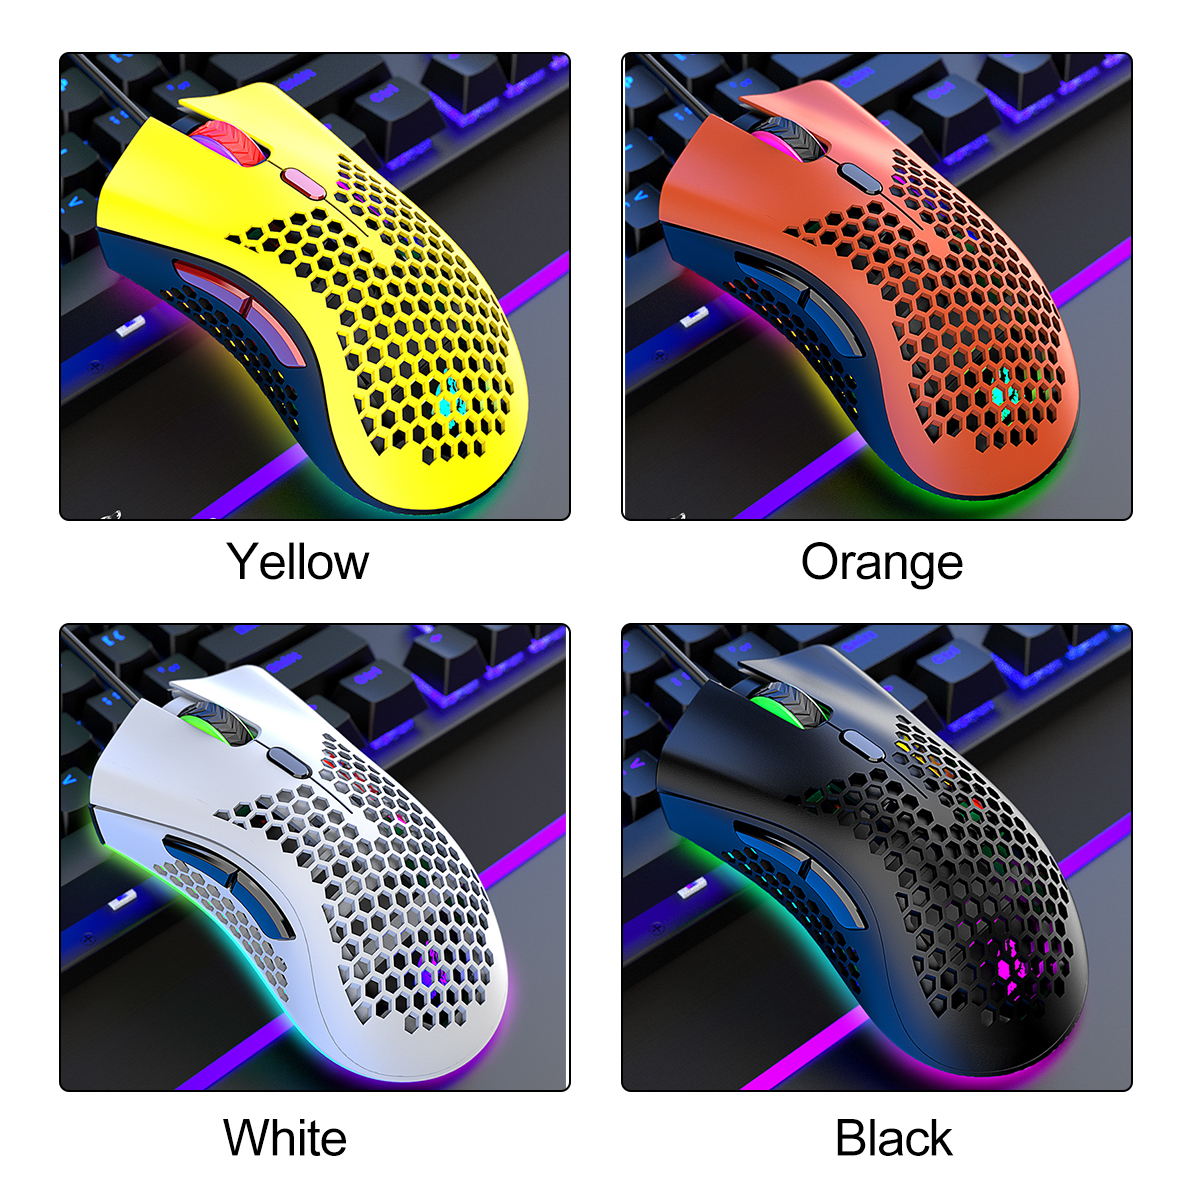 Wired-Gaming-Mouse-RGB-Lamp-12000DPI-Lightweight-For-LaptopDesktop-1740875-8